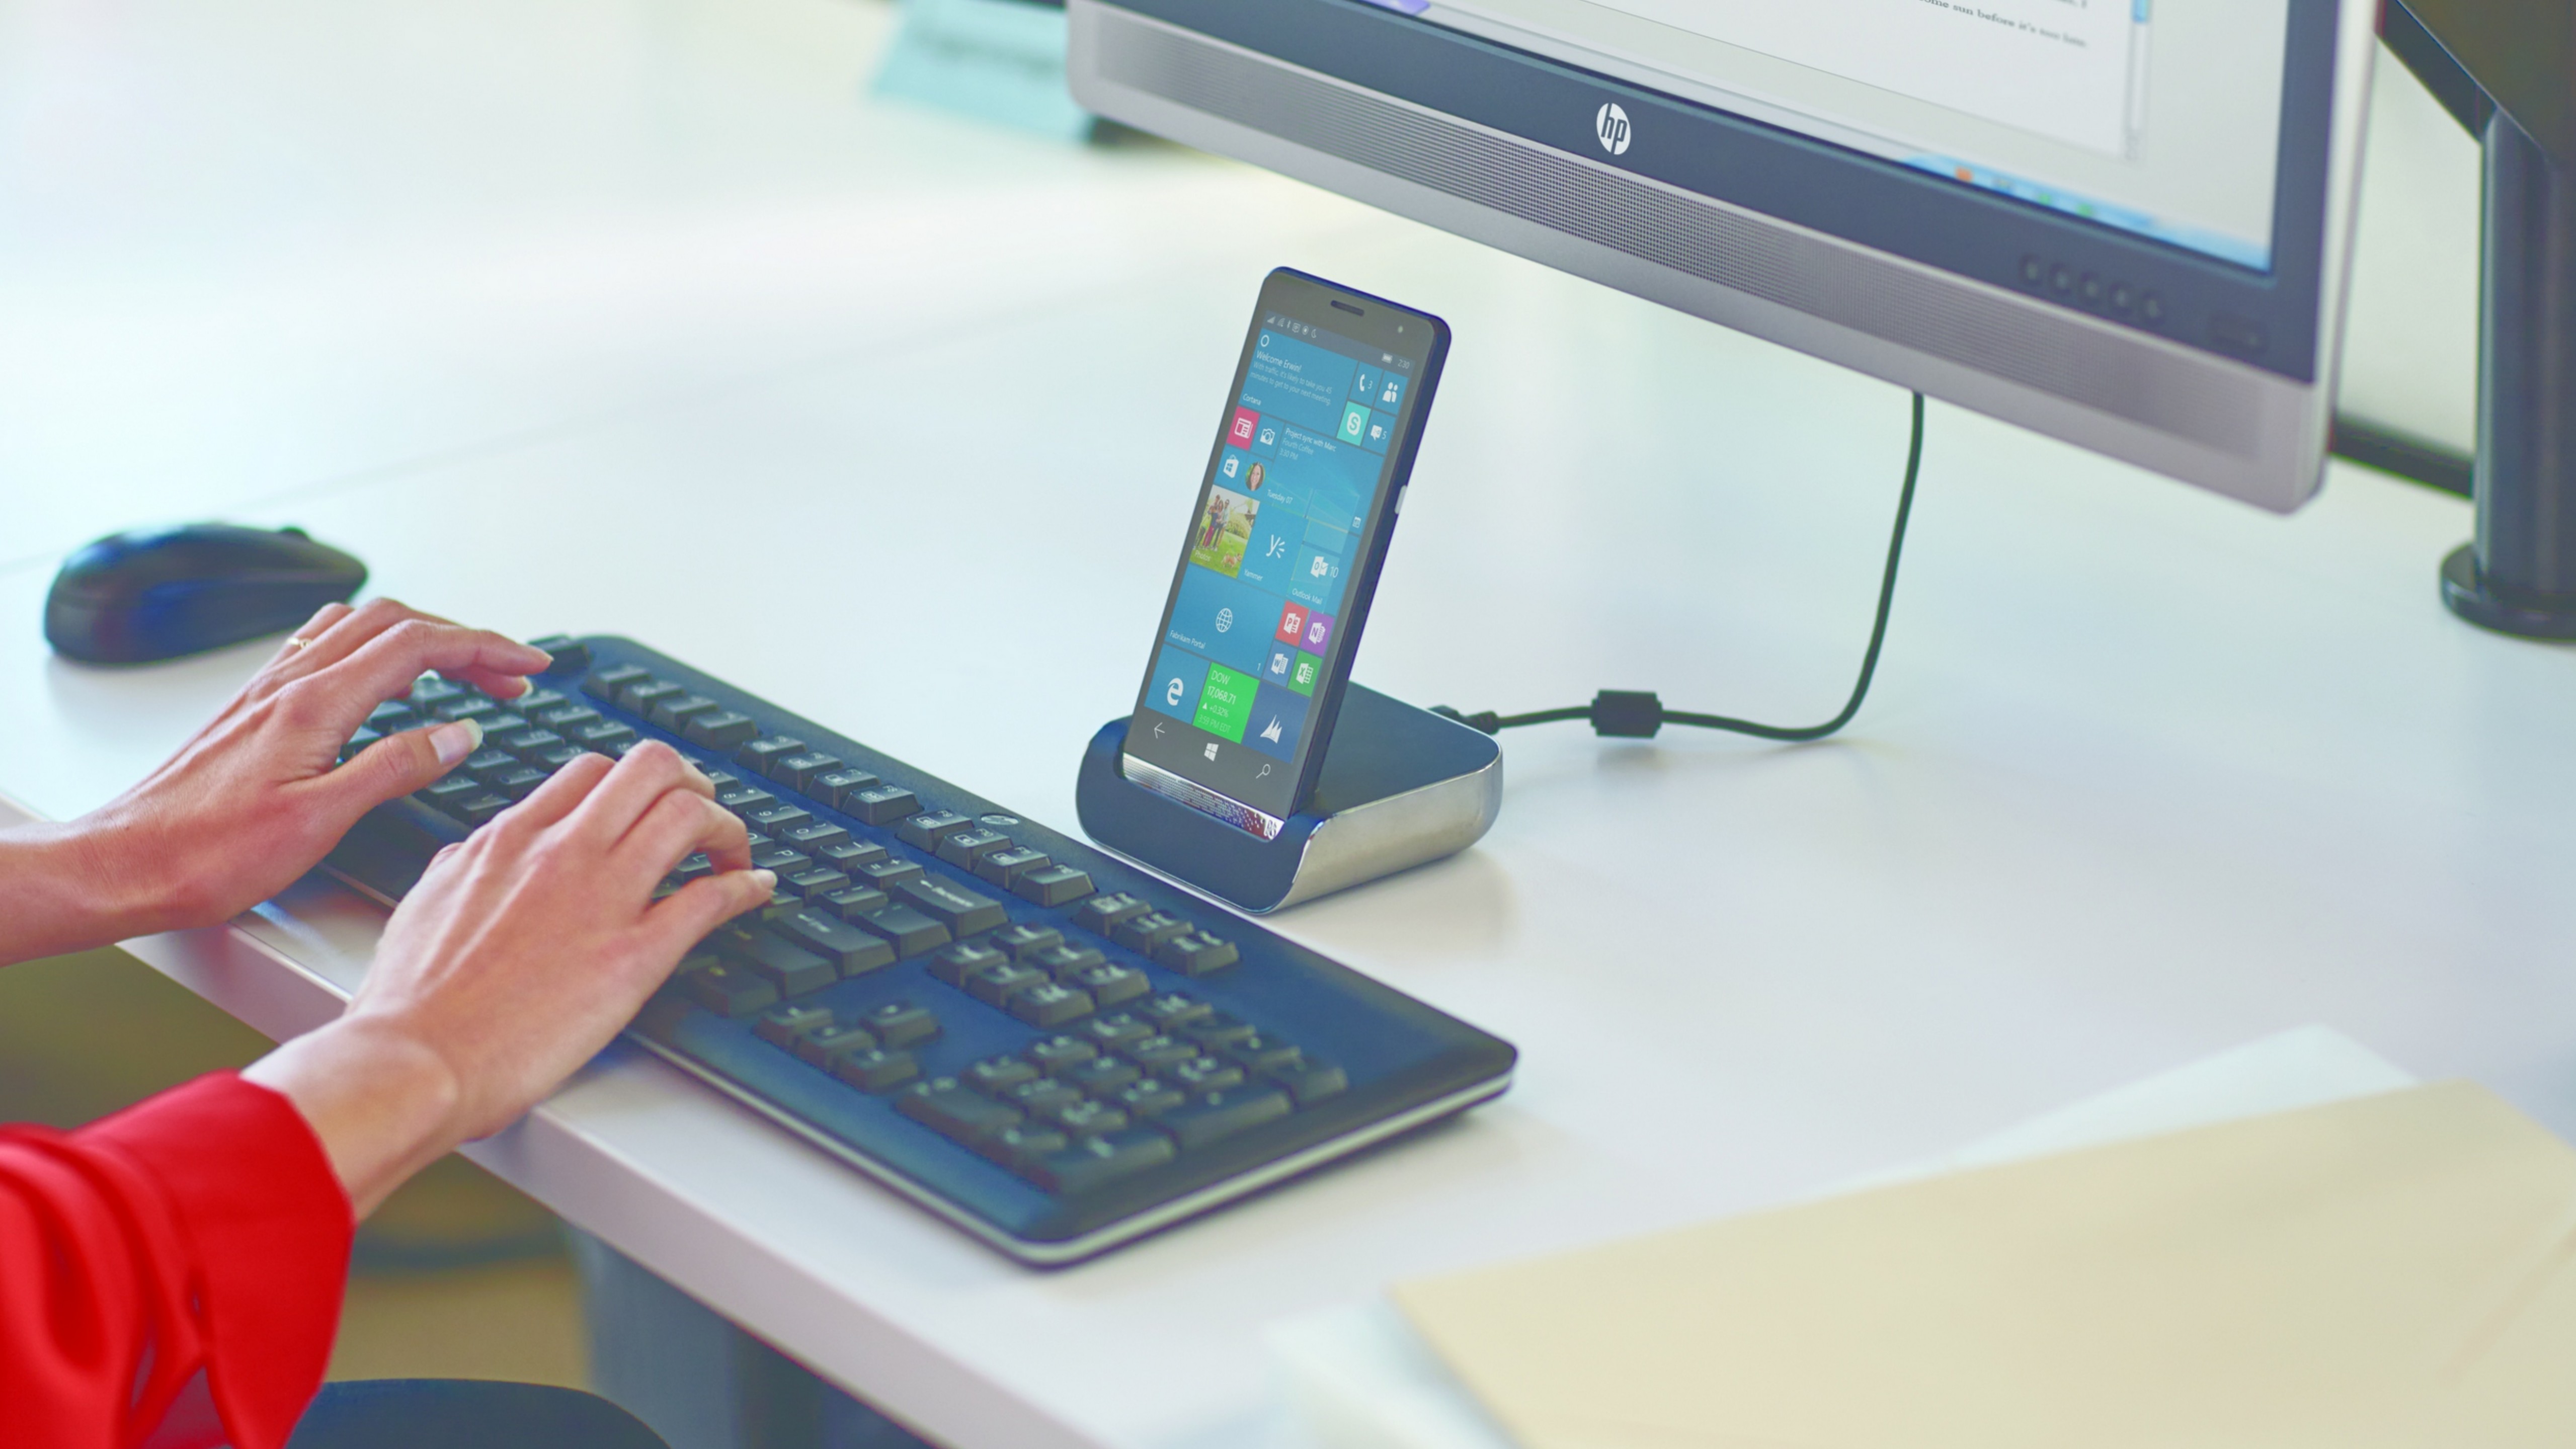 Introducing the HP Elite x3 powered by Windows 10